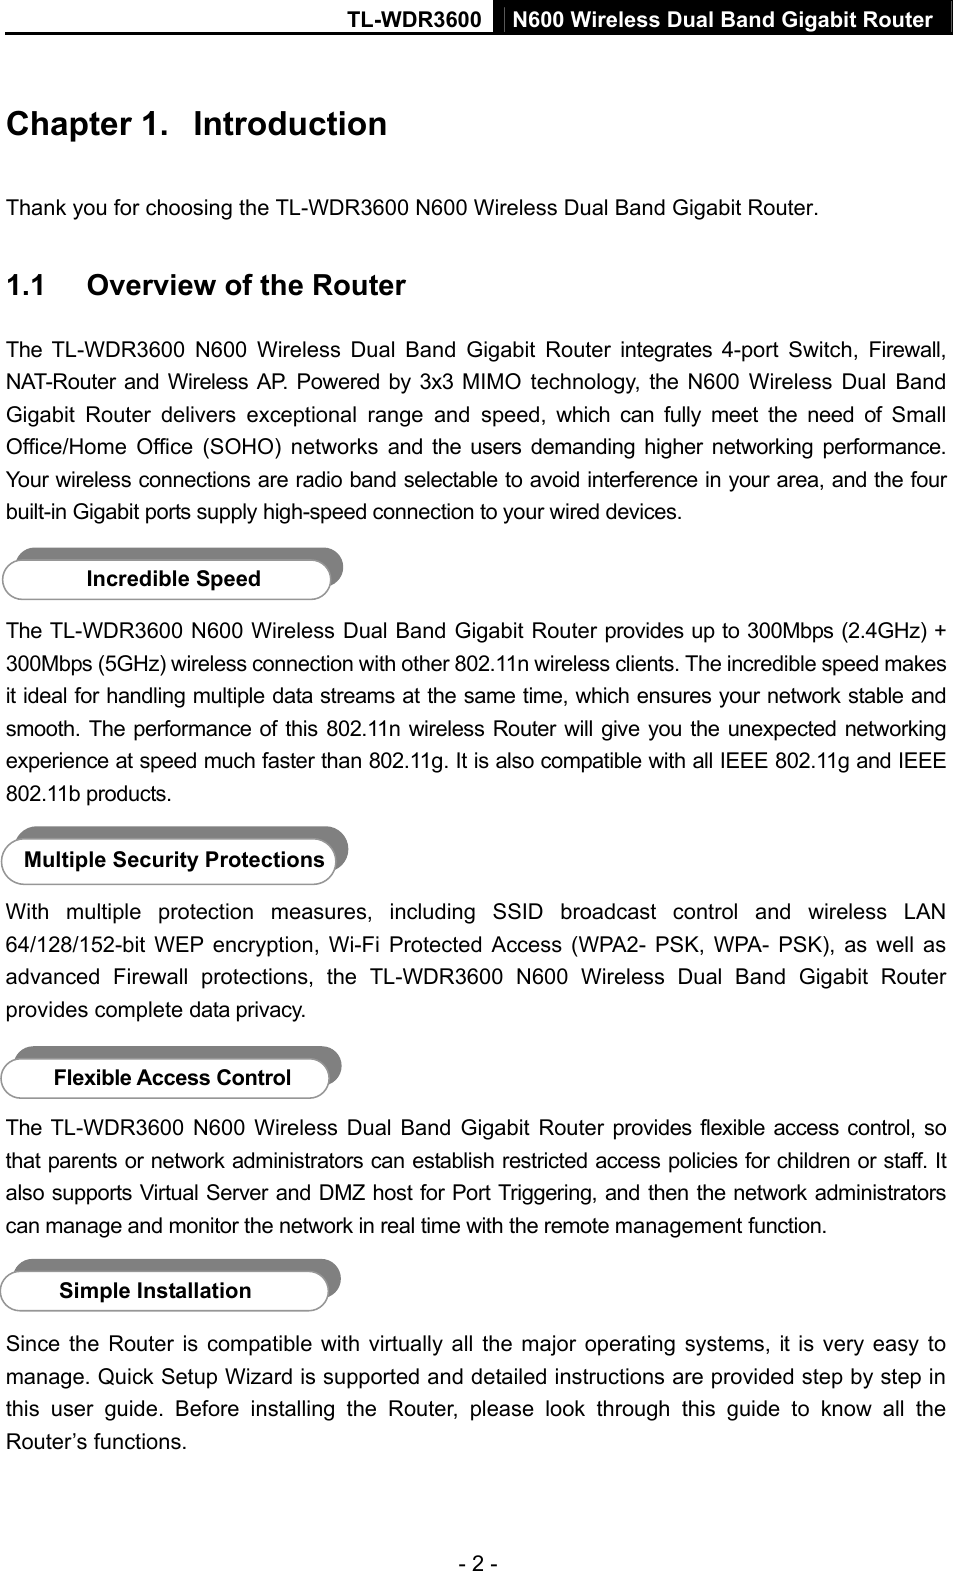 TL-WDR3600 N600 Wireless Dual Band Gigabit Router  - 2 - Chapter 1.  Introduction Thank you for choosing the TL-WDR3600 N600 Wireless Dual Band Gigabit Router. 1.1  Overview of the Router The TL-WDR3600 N600 Wireless Dual Band Gigabit Router integrates 4-port Switch, Firewall, NAT-Router and Wireless AP. Powered by 3x3 MIMO technology, the N600 Wireless Dual Band Gigabit Router delivers exceptional range and speed, which can fully meet the need of Small Office/Home Office (SOHO) networks and the users demanding higher networking performance. Your wireless connections are radio band selectable to avoid interference in your area, and the four built-in Gigabit ports supply high-speed connection to your wired devices.    Incredible Speed The TL-WDR3600 N600 Wireless Dual Band Gigabit Router provides up to 300Mbps (2.4GHz) + 300Mbps (5GHz) wireless connection with other 802.11n wireless clients. The incredible speed makes it ideal for handling multiple data streams at the same time, which ensures your network stable and smooth. The performance of this 802.11n wireless Router will give you the unexpected networking experience at speed much faster than 802.11g. It is also compatible with all IEEE 802.11g and IEEE 802.11b products.  Multiple Security Protections With multiple protection measures, including SSID broadcast control and wireless LAN 64/128/152-bit WEP encryption, Wi-Fi Protected Access (WPA2- PSK, WPA- PSK), as well as advanced Firewall protections, the TL-WDR3600 N600 Wireless Dual Band Gigabit Router provides complete data privacy.    Flexible Access Control The TL-WDR3600 N600 Wireless Dual Band Gigabit Router provides flexible access control, so that parents or network administrators can establish restricted access policies for children or staff. It also supports Virtual Server and DMZ host for Port Triggering, and then the network administrators can manage and monitor the network in real time with the remote management function.    Simple Installation Since the Router is compatible with virtually all the major operating systems, it is very easy to manage. Quick Setup Wizard is supported and detailed instructions are provided step by step in this user guide. Before installing the Router, please look through this guide to know all the Router’s functions. 